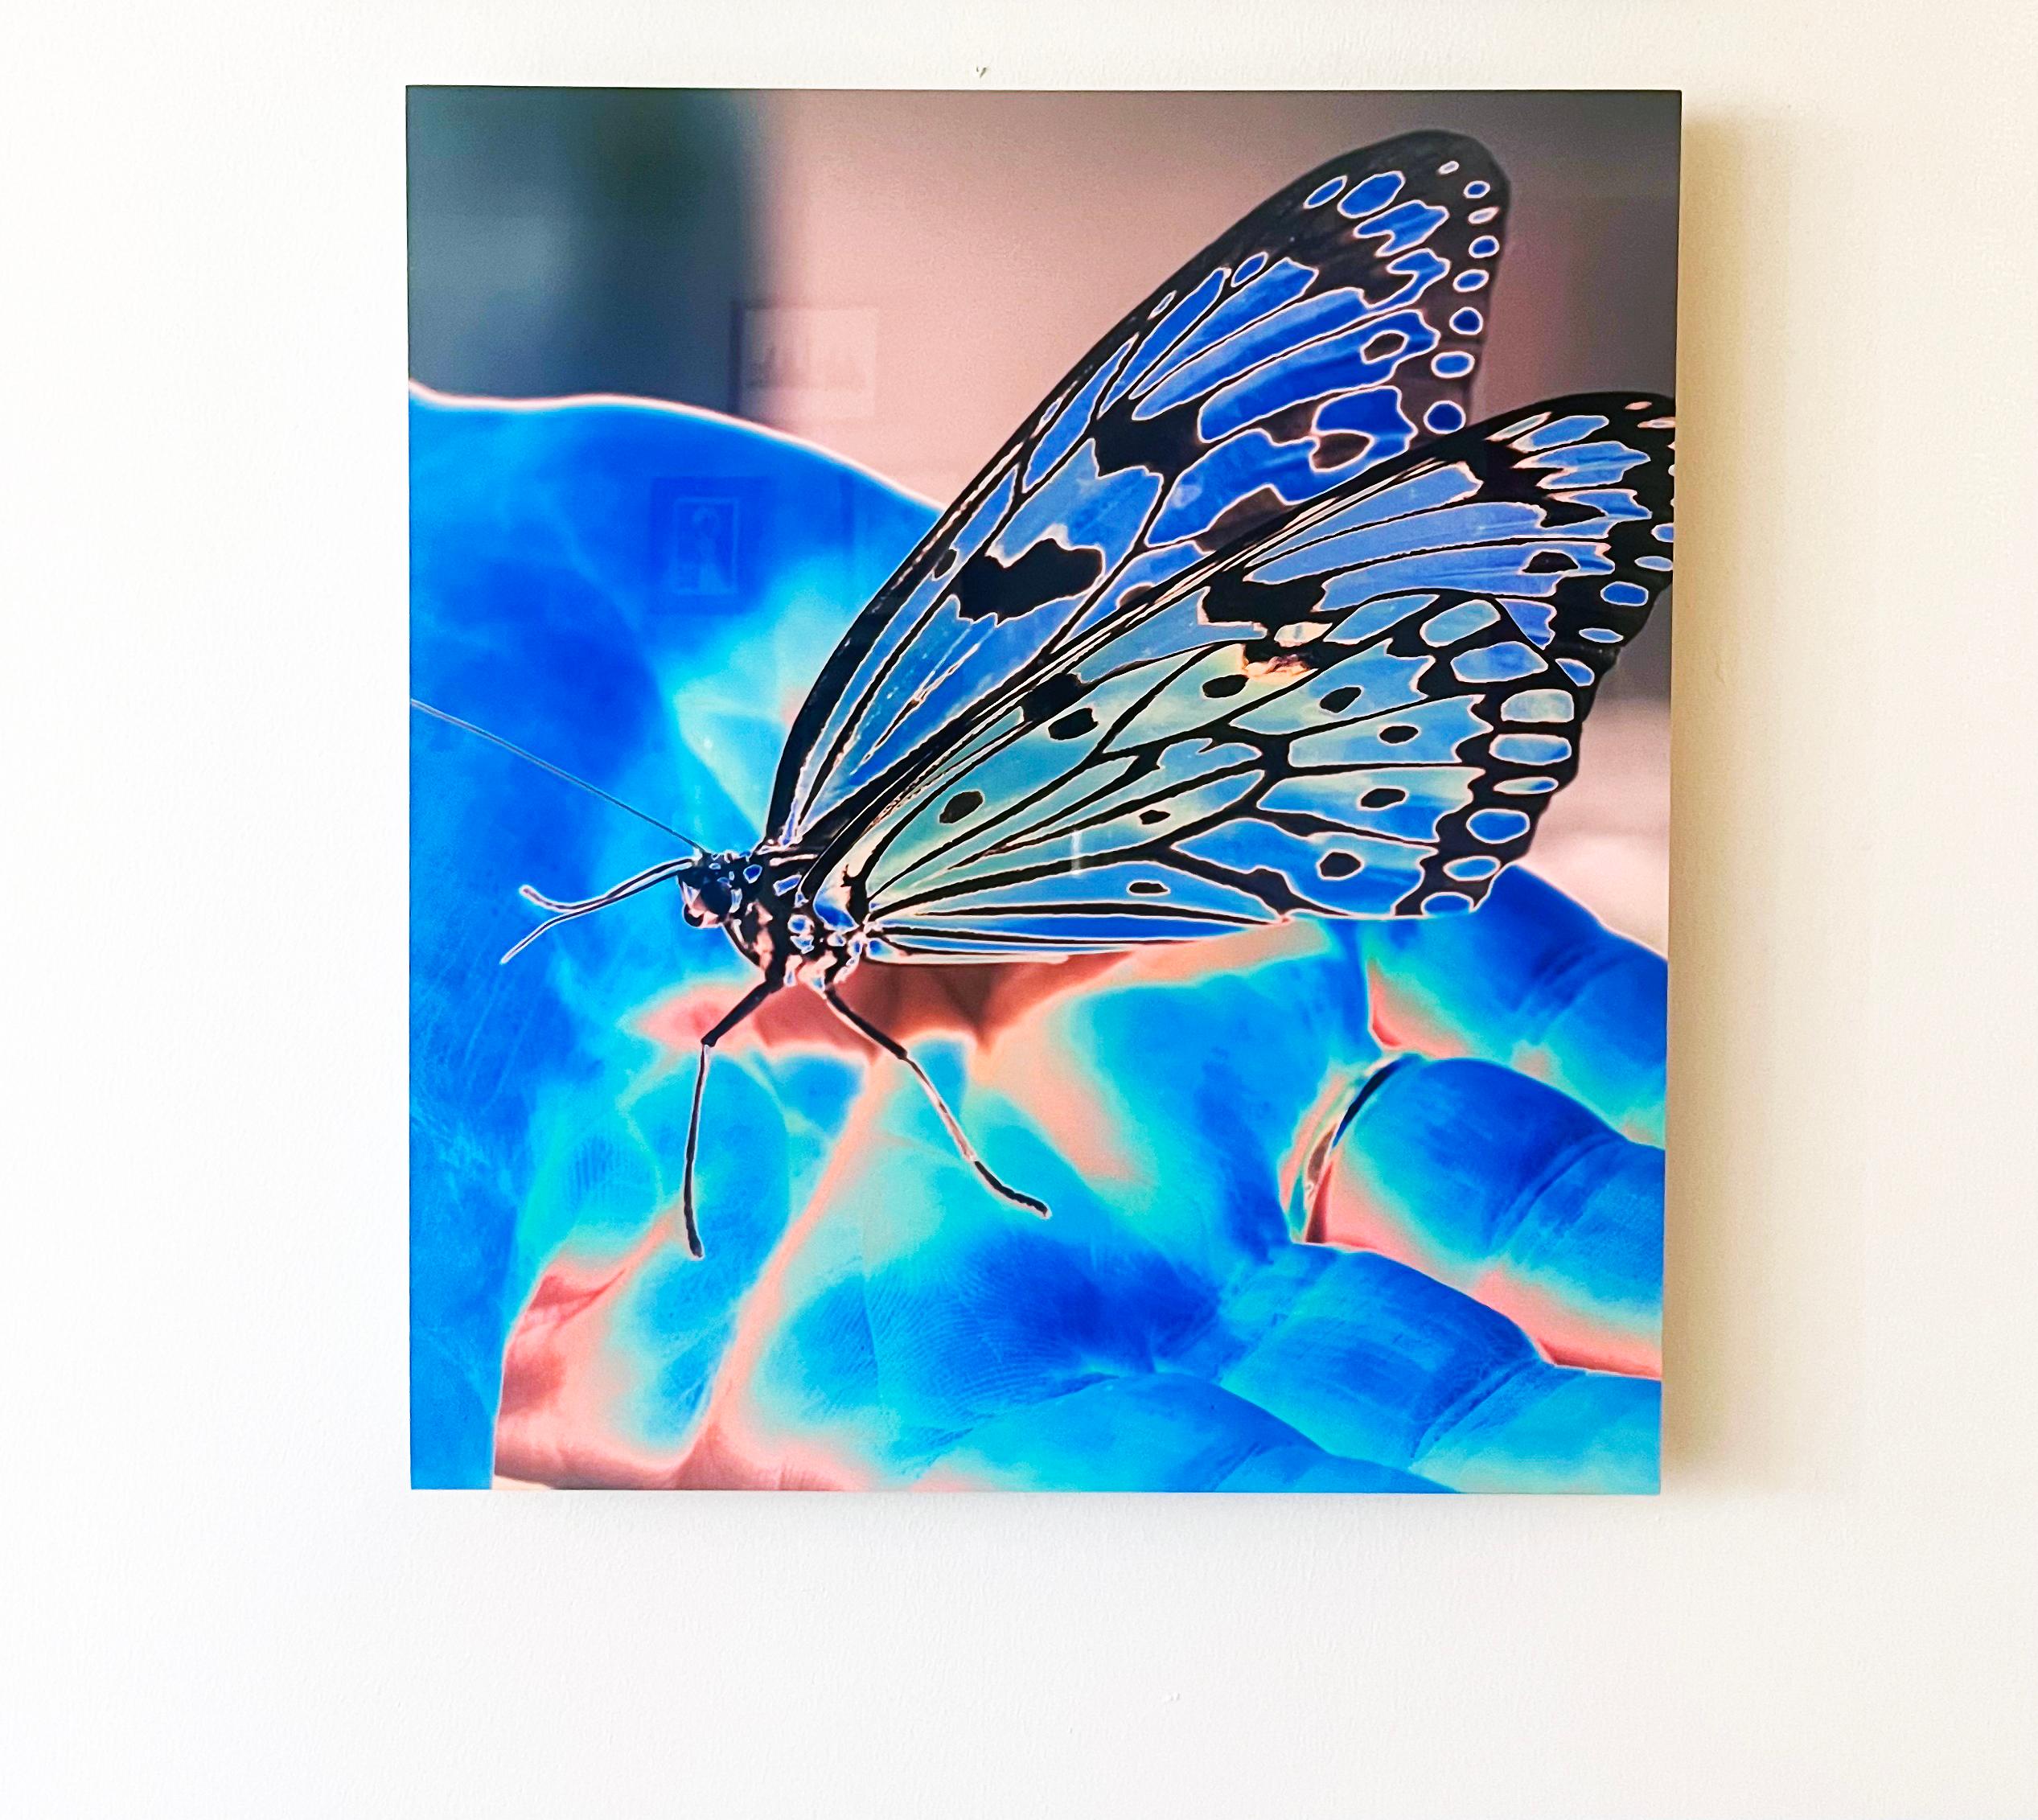 Butterfly Blue, 2016 by Roberta Fineberg is a 20” x 18” contemporary archival dye-sub print on aluminum titled, dated, signed by the artist on verso (back of art). Edition of 10. 

From the transformative to the ephemeral, the birth and death of a